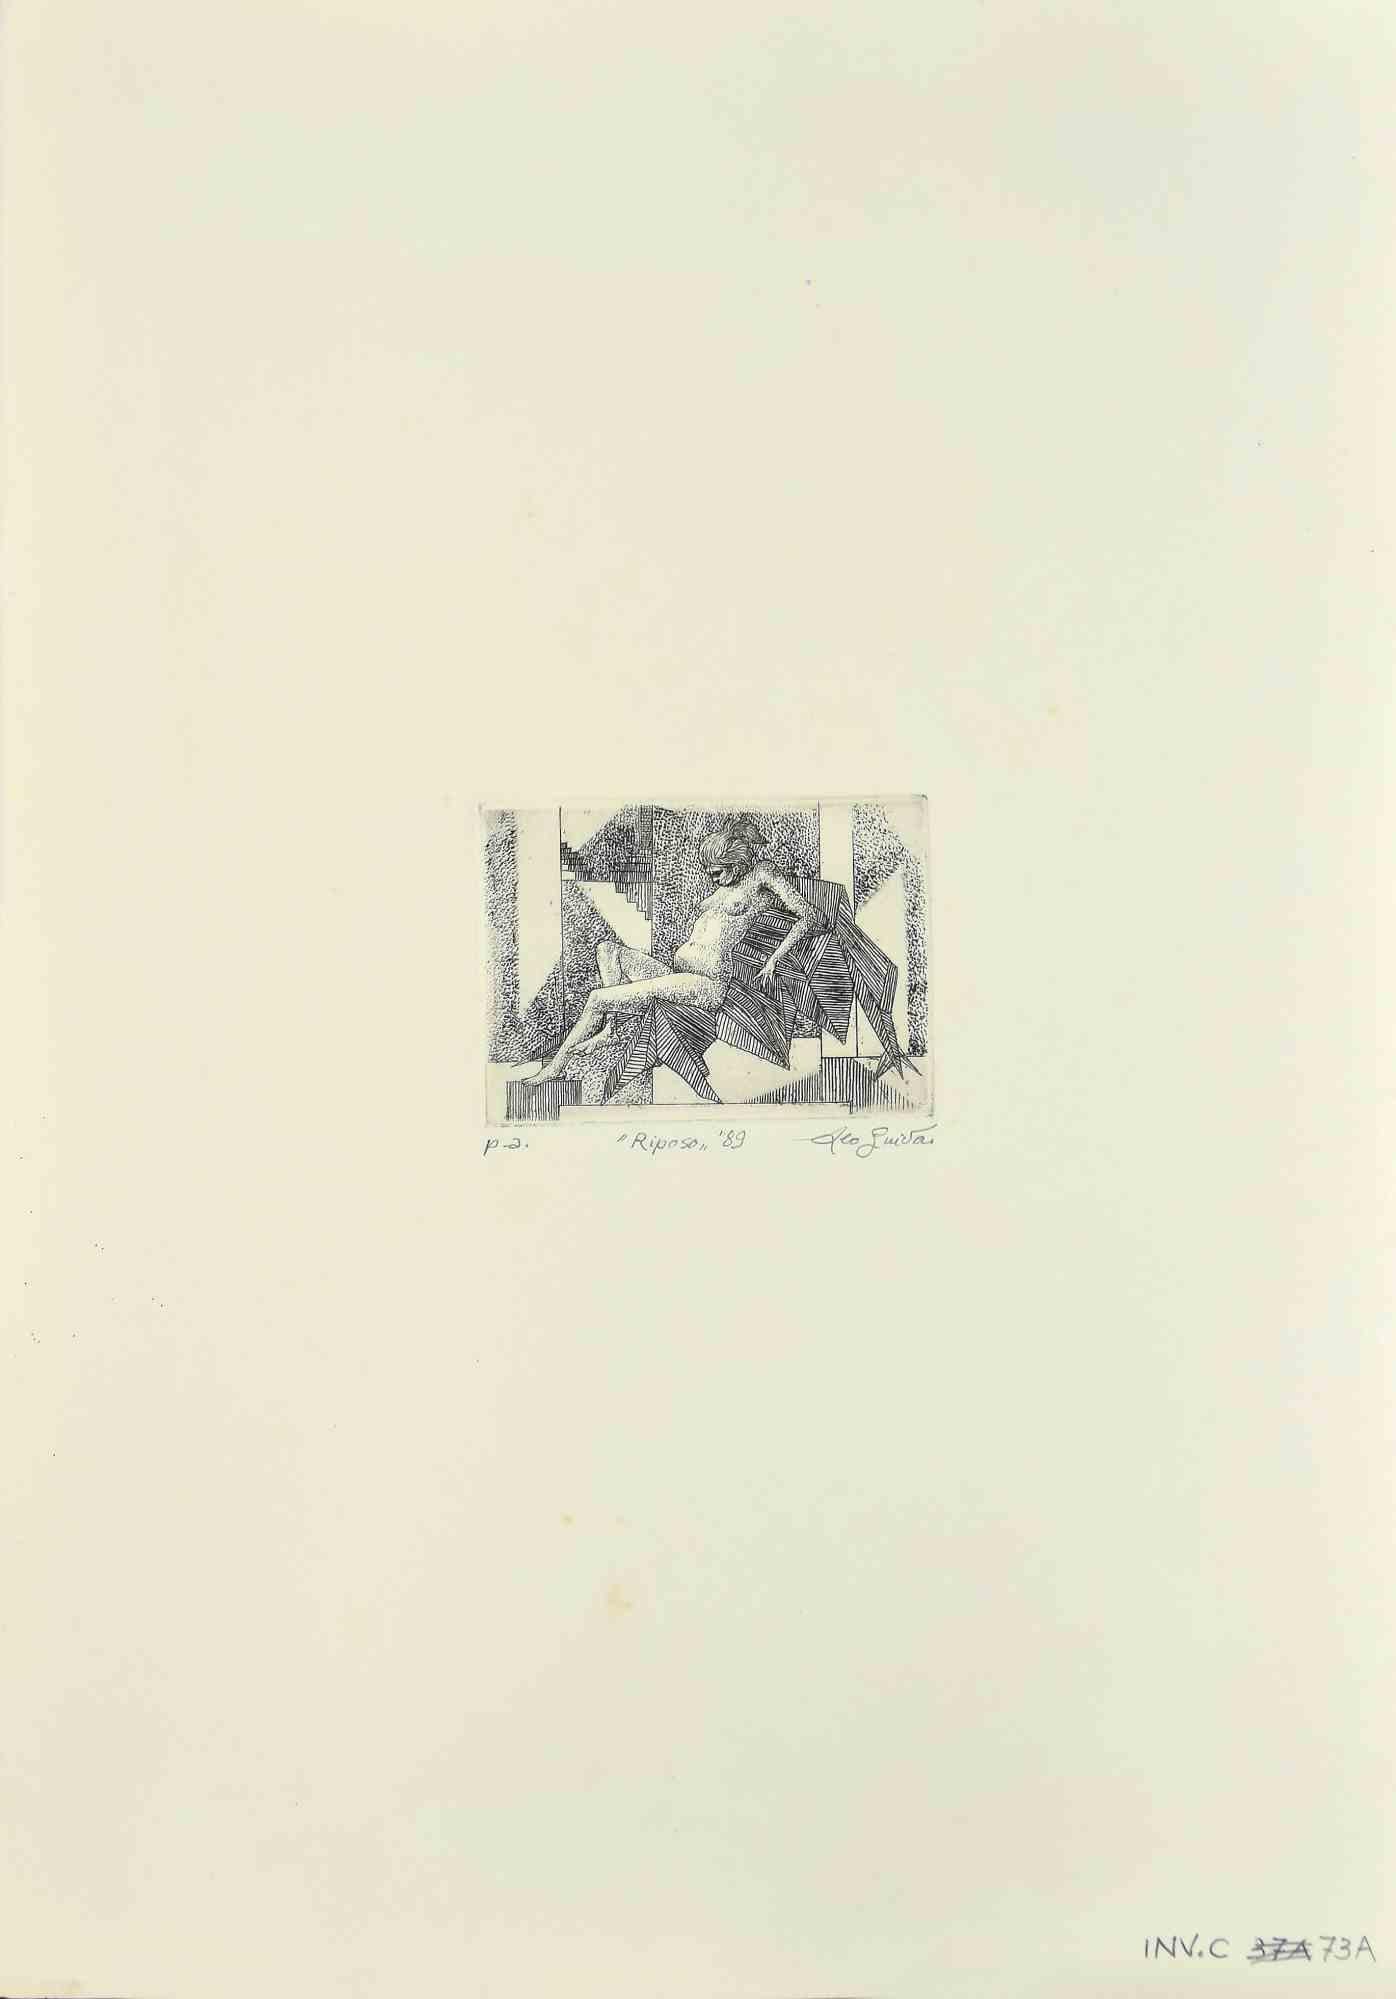 Rest is an original etching realized by Leo Guida in 1989.

Guter Zustand.

Mounted on a white cardboard passpartout (50x35)

Hand-signed and dateb by the artist.

Artist proof.

Leo Guida  (1992 - 2017). Sensitive to current issues, artistic